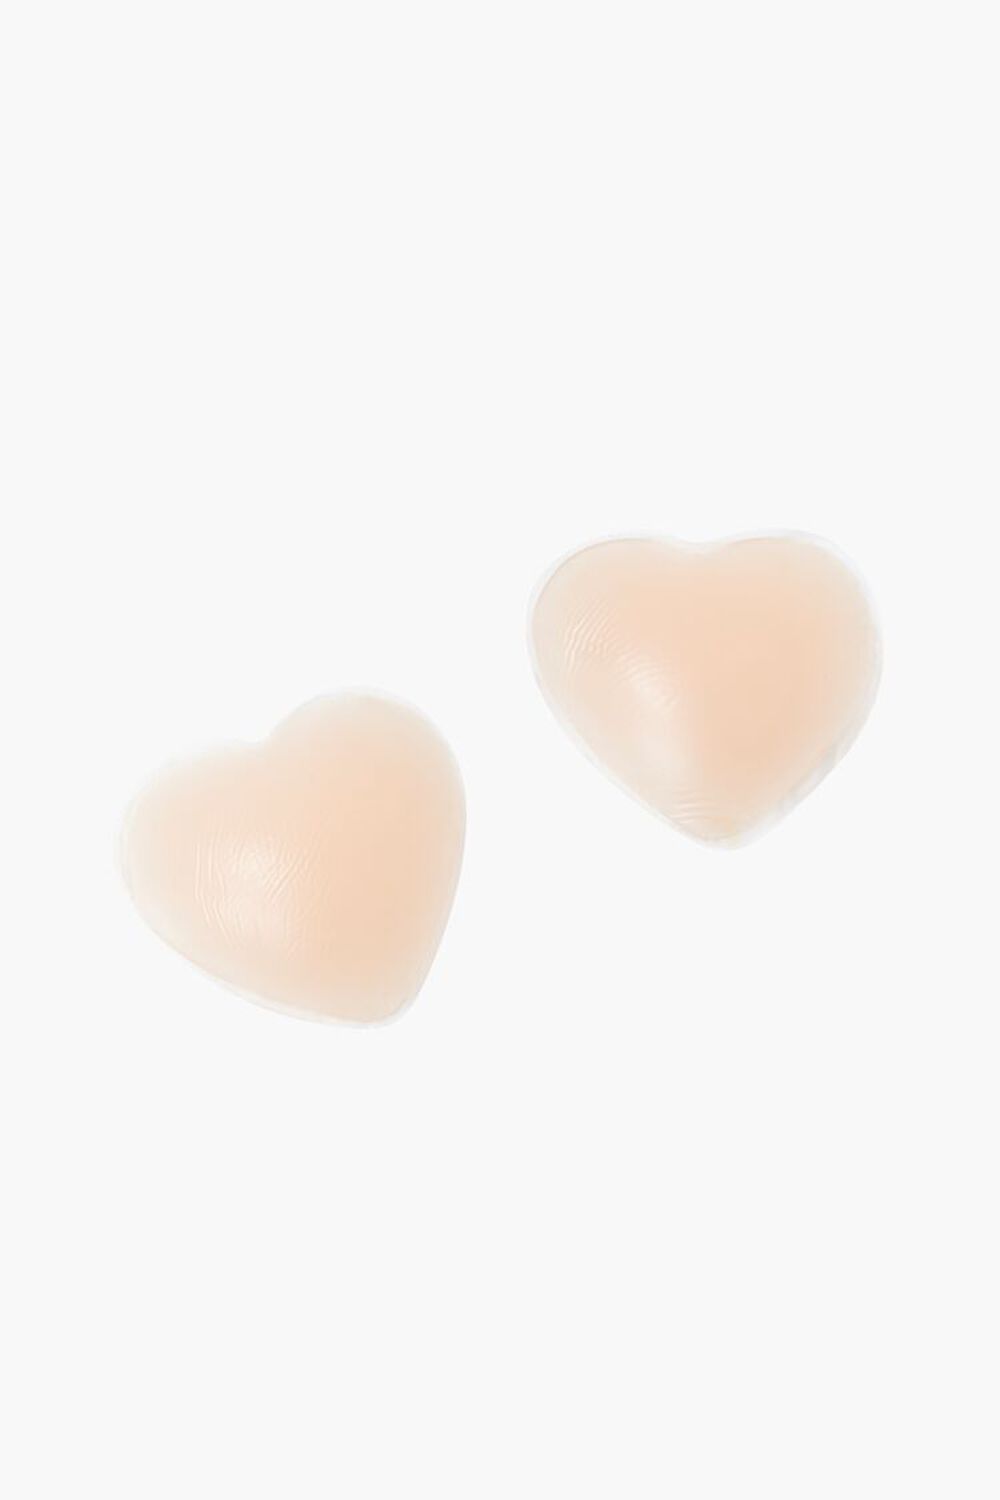 NUDE Heart-Shaped Pasties, image 1